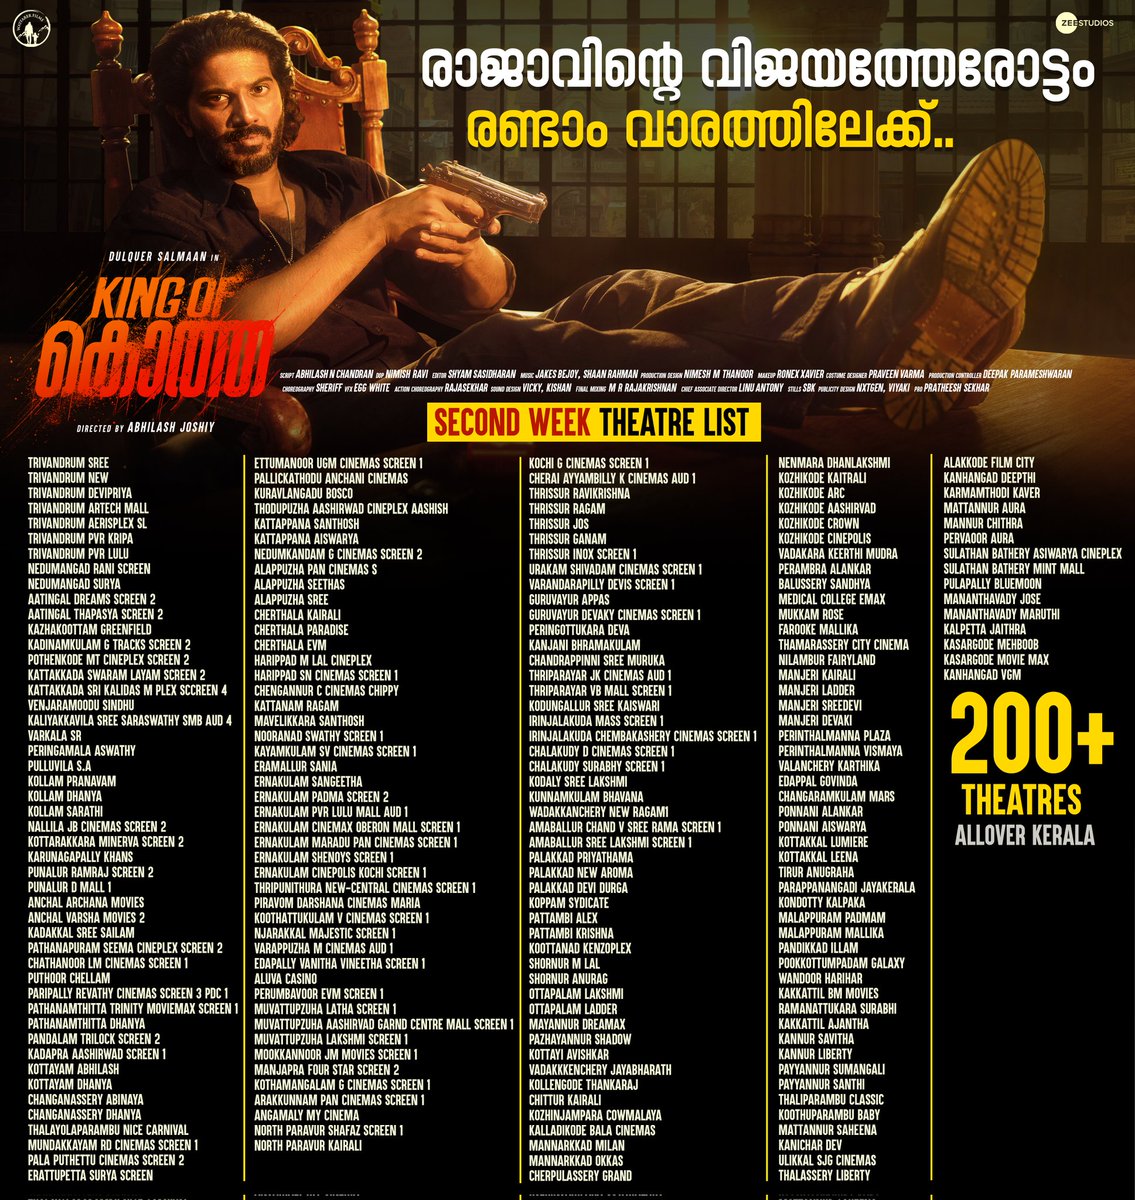 Here’s the 2nd week Kerala theatre list for #KingOfKotha !!! Book your tickets now!!